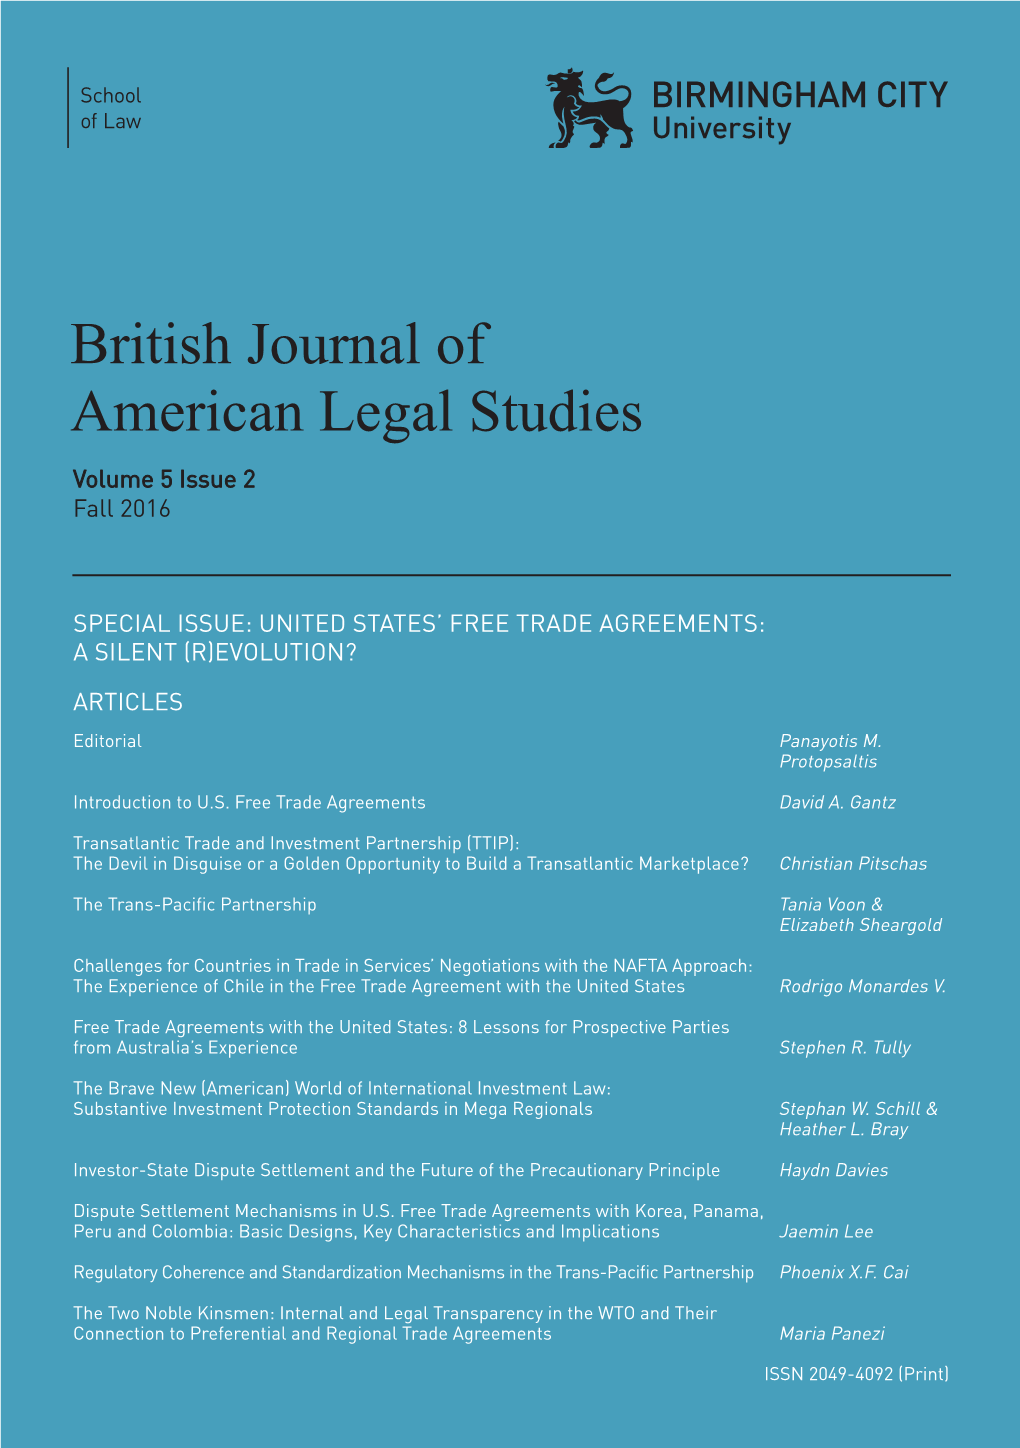 British Journal of American Legal Studies Volume 5 Issue 2 Fall 2016